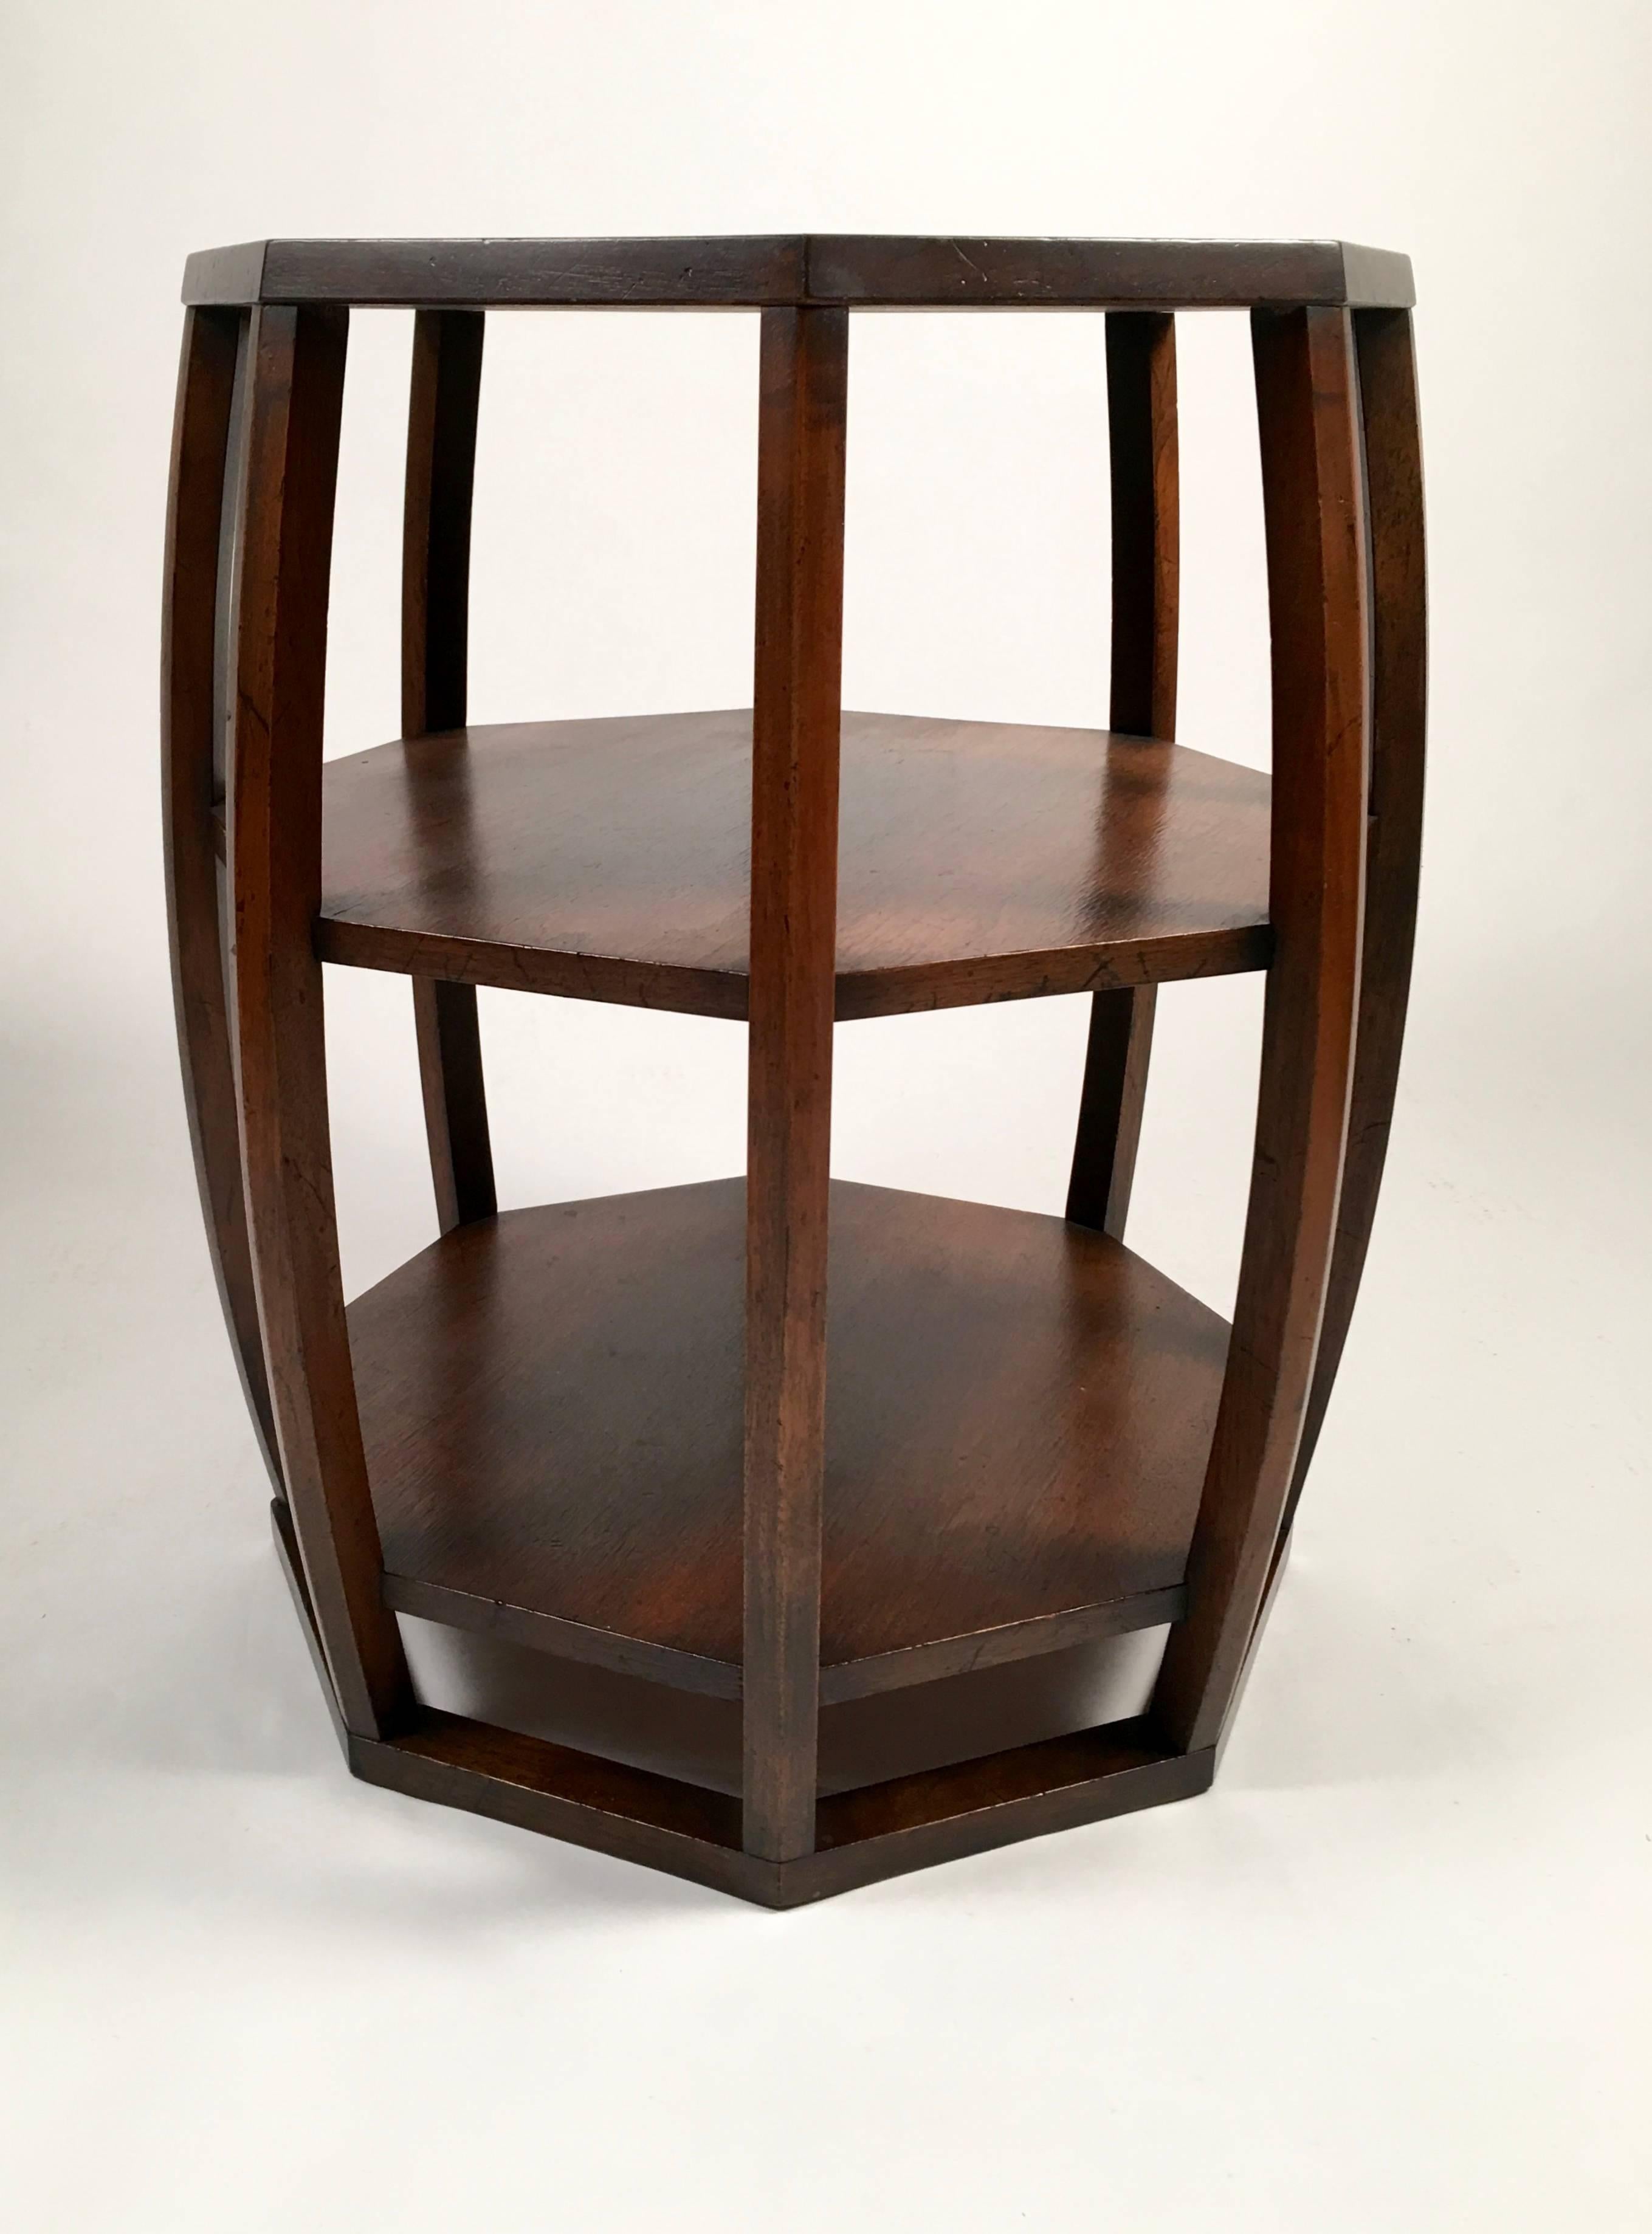 A well-made Asian inspired Mid-Century Modern occasional table in 'antique bronze' stained oak, of octagonal barrel-form, the open sides revealing two interior shelves, retaining its original Widdicomb Furniture Company label.

Measures: Height: